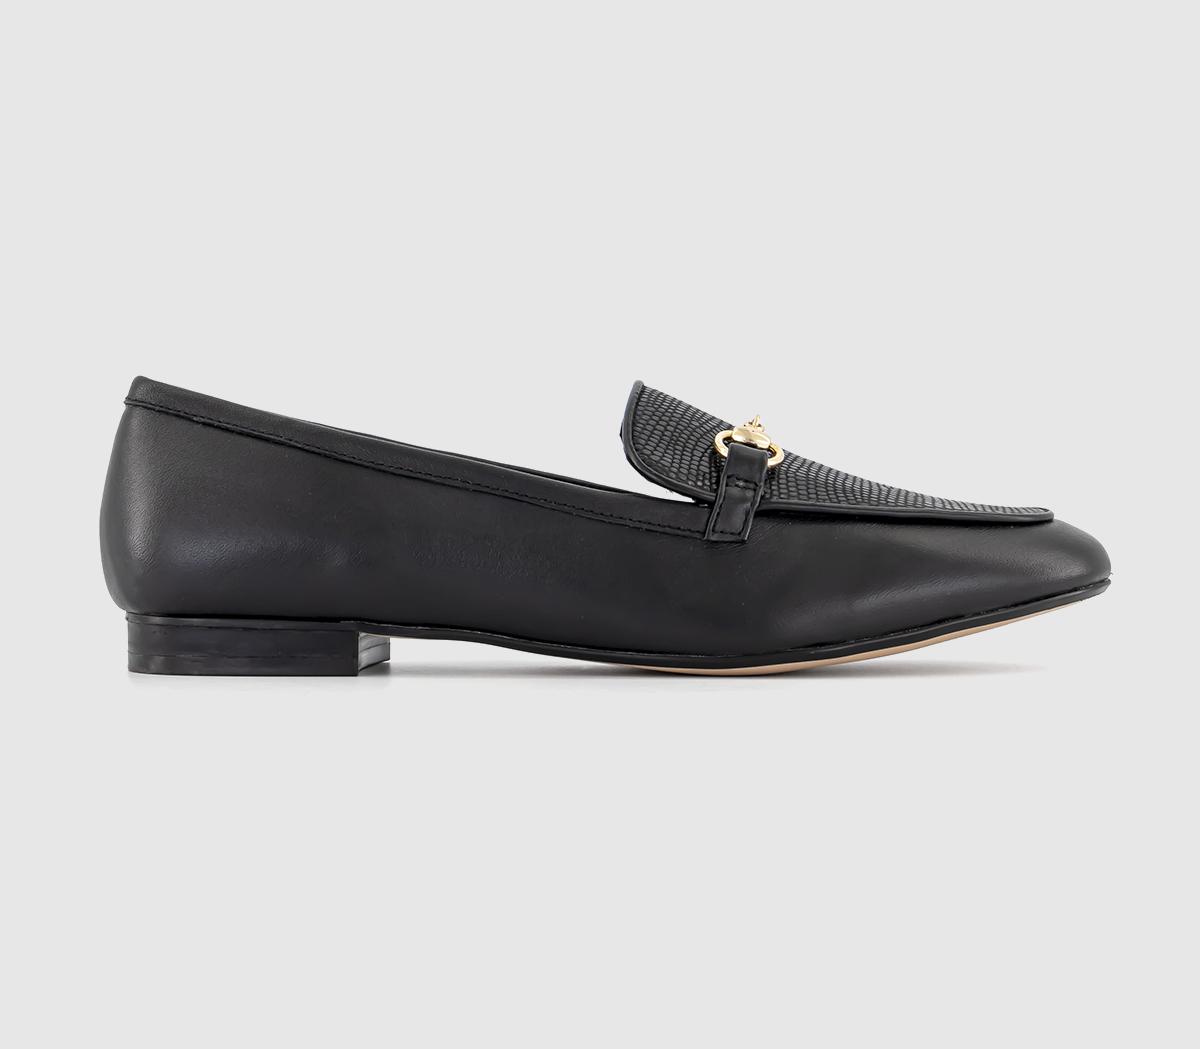 OFFICE Finer Leather Embossed Loafers Black Leather - Flat Shoes for Women